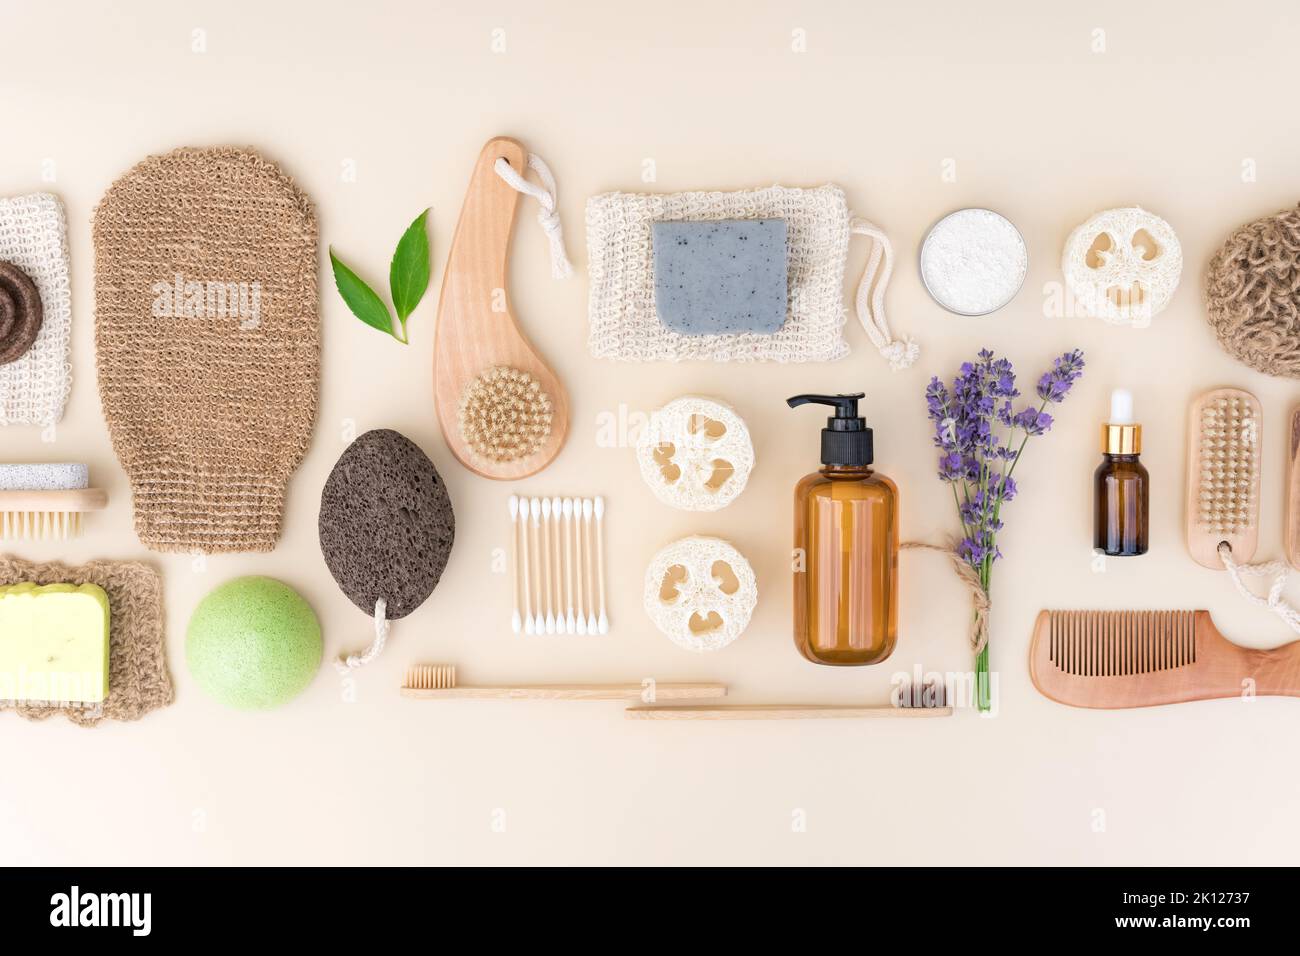 Self-care products, herbal cosmetics for bodycare and skin care with lavender flowers. Natural bath accessories bundle over light background. Eco livi Stock Photo